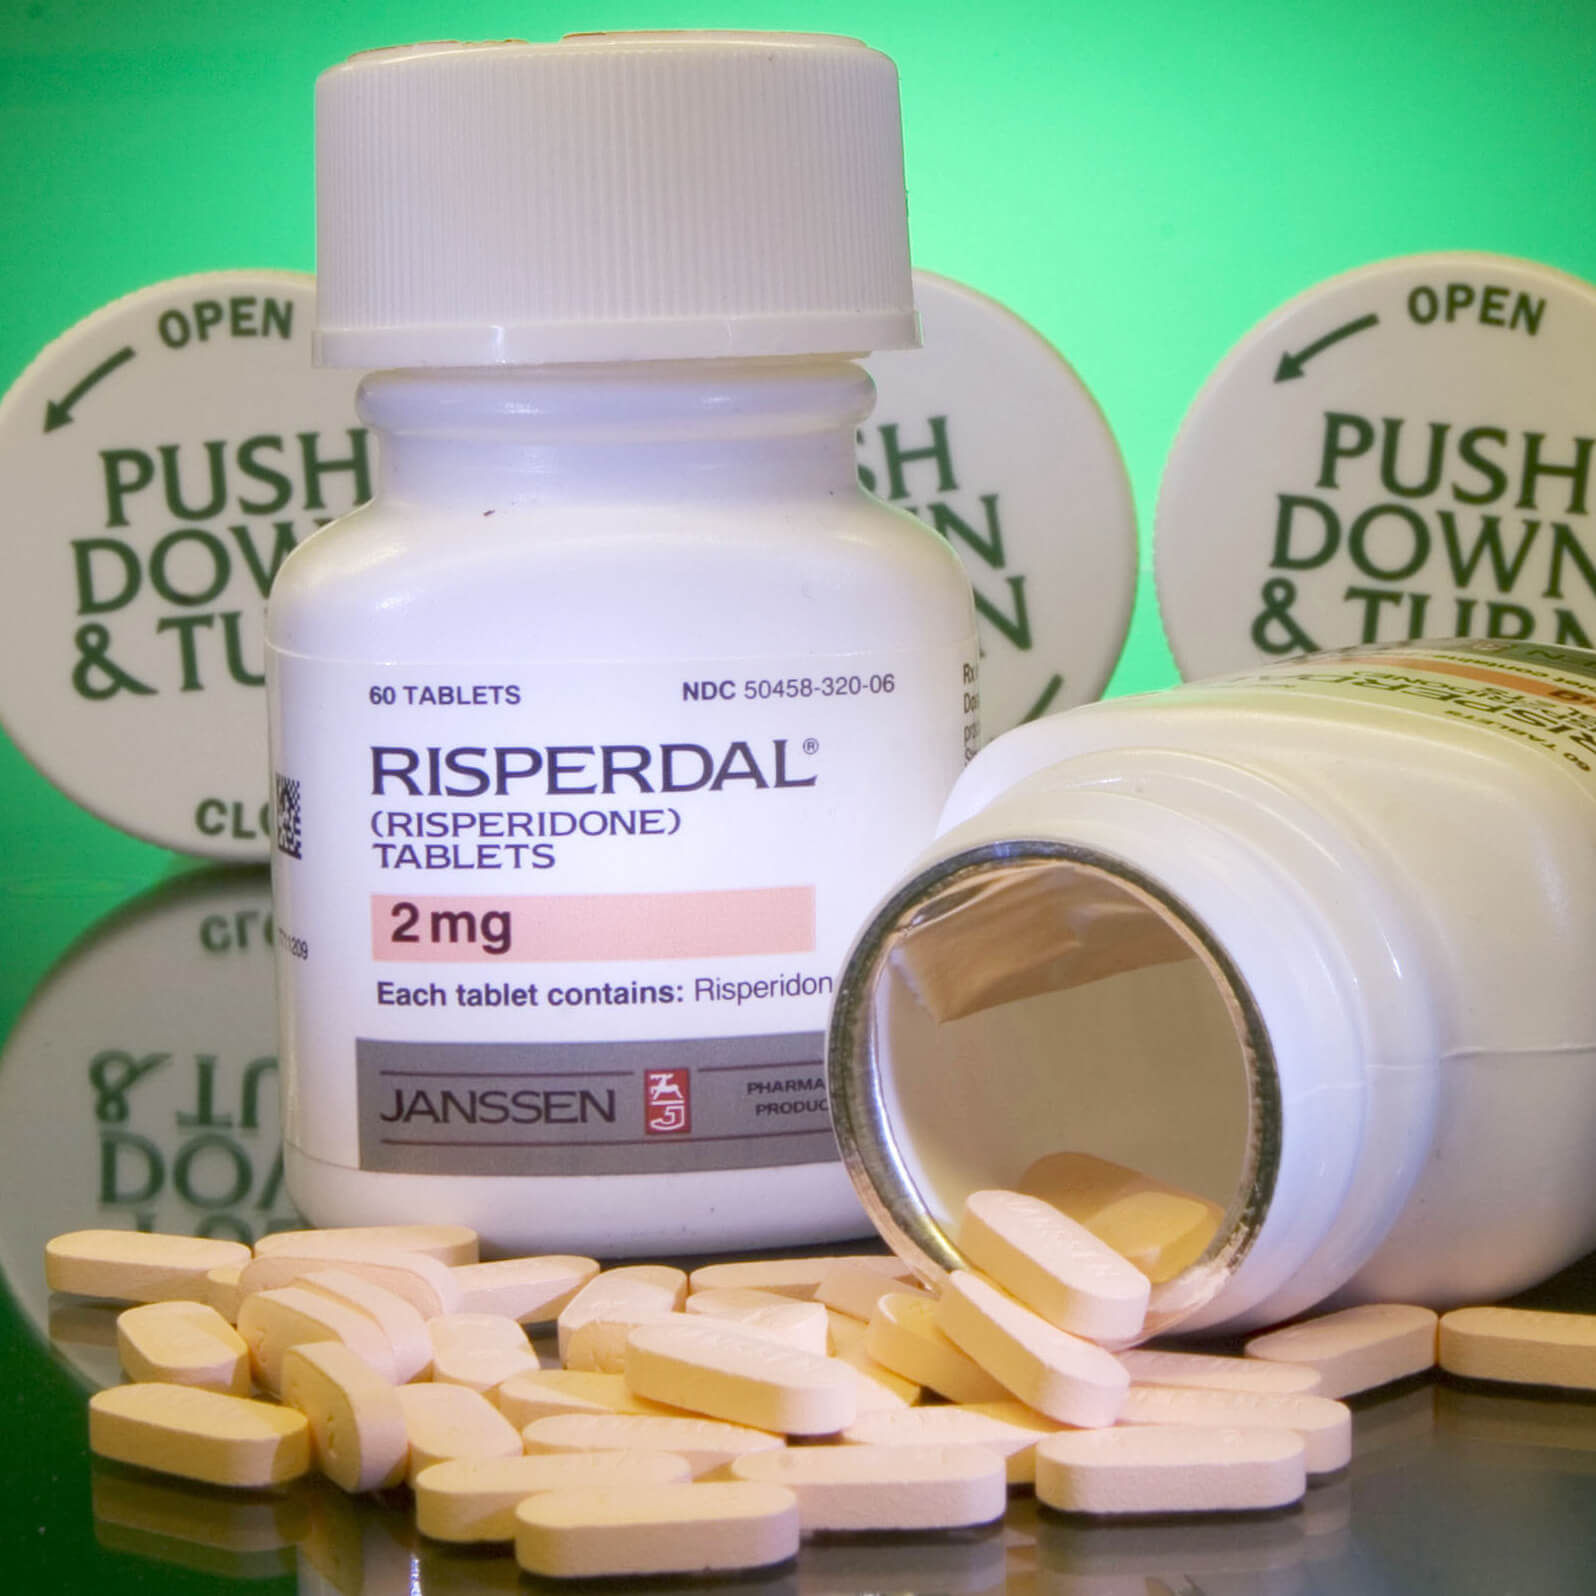 What’s Next For Risperdal? l Consumer Advocacy News